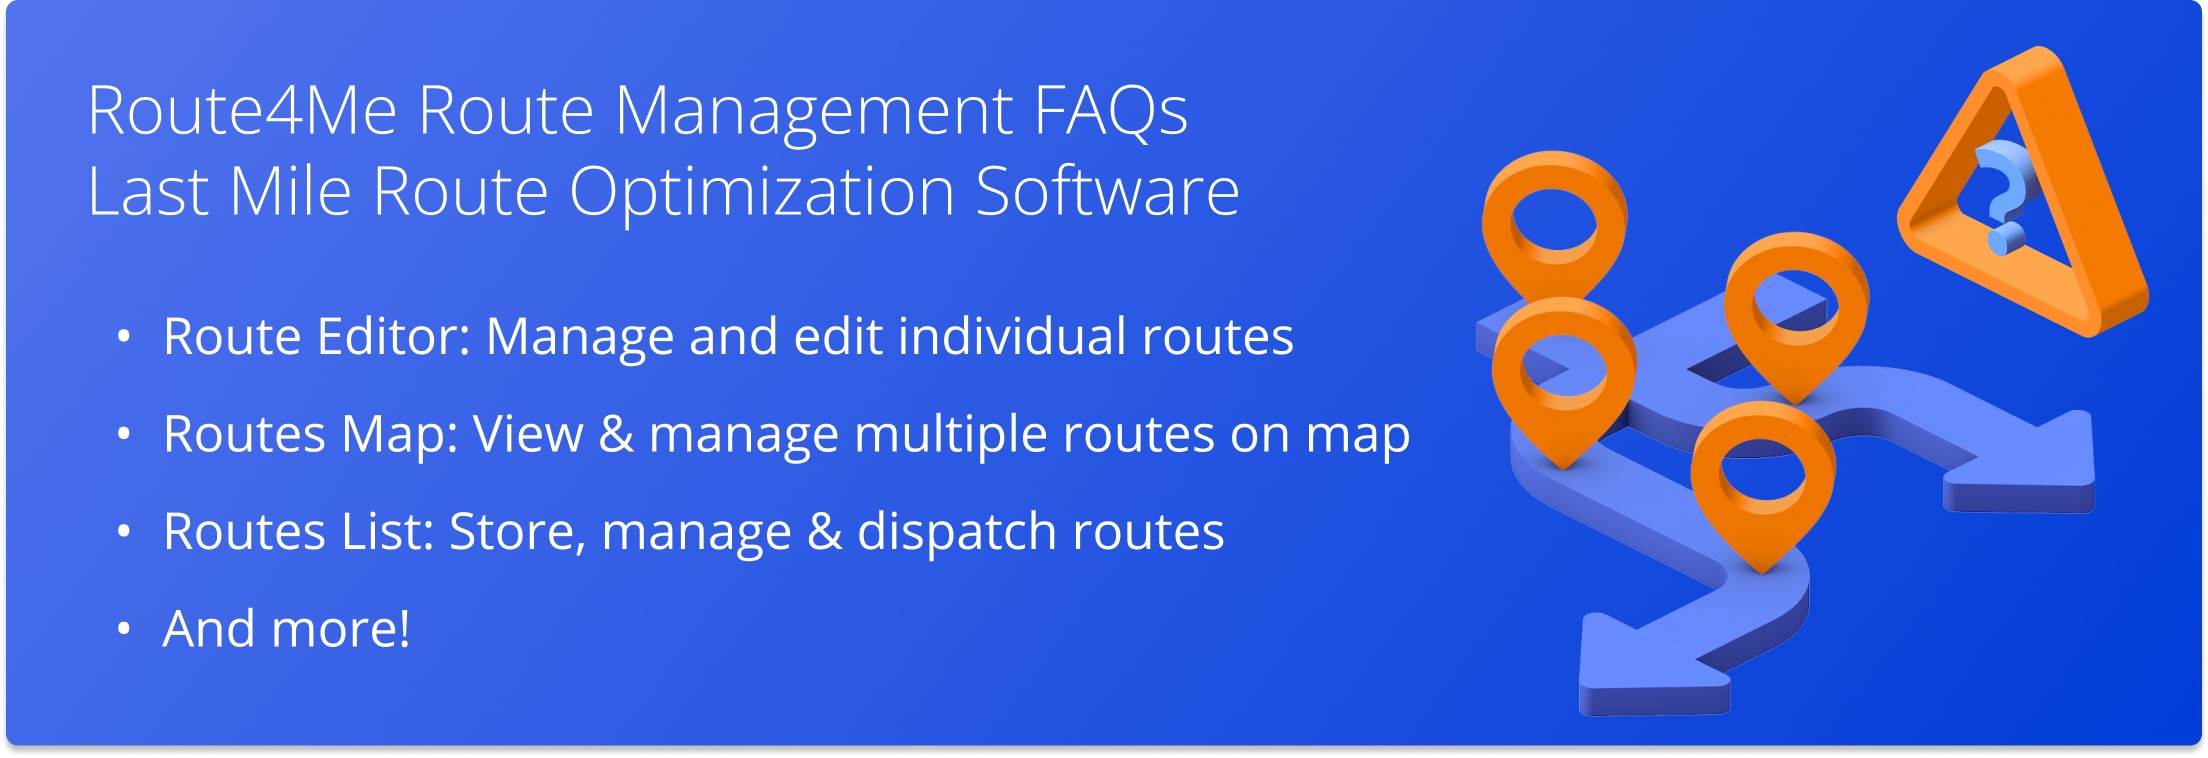 Route4Me Route Management Software: Route Editor for opening individual routes, Routes Map for managing multiple routes, and Routes List for storing planned routes.